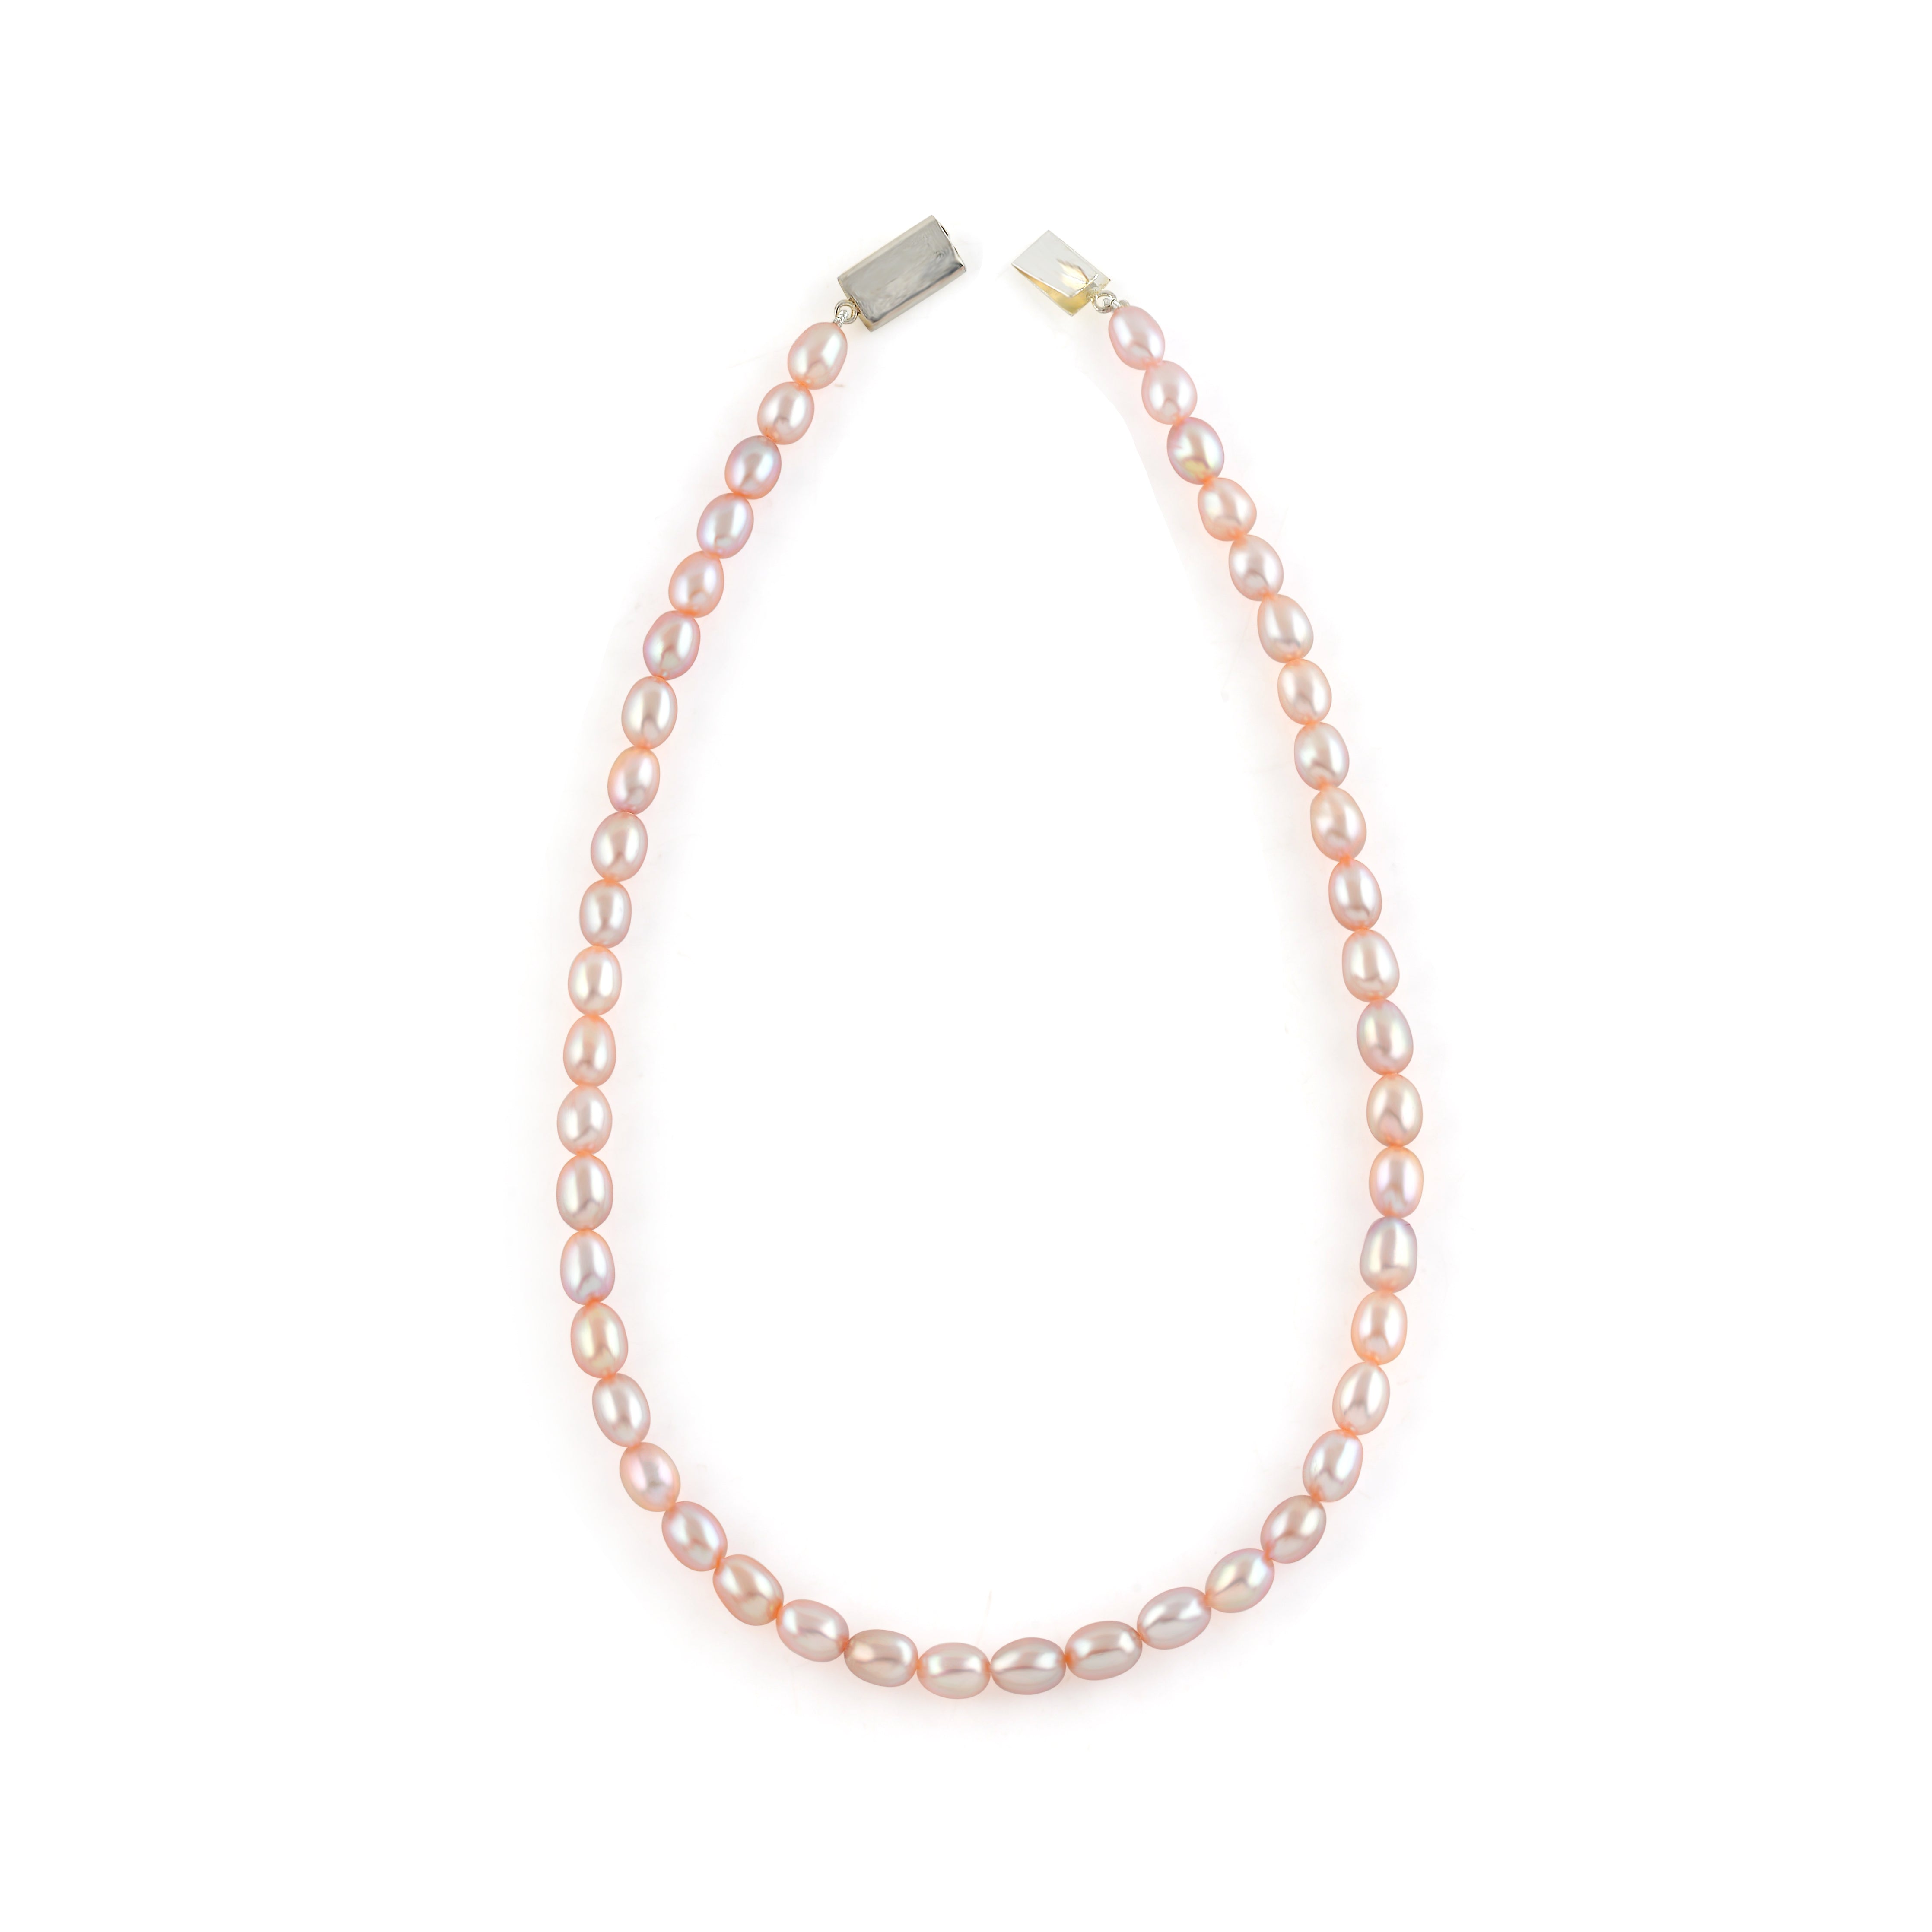 Single Line Pearl Necklace in Peach Blossom - Krishna Jewellers Pearls and Gems